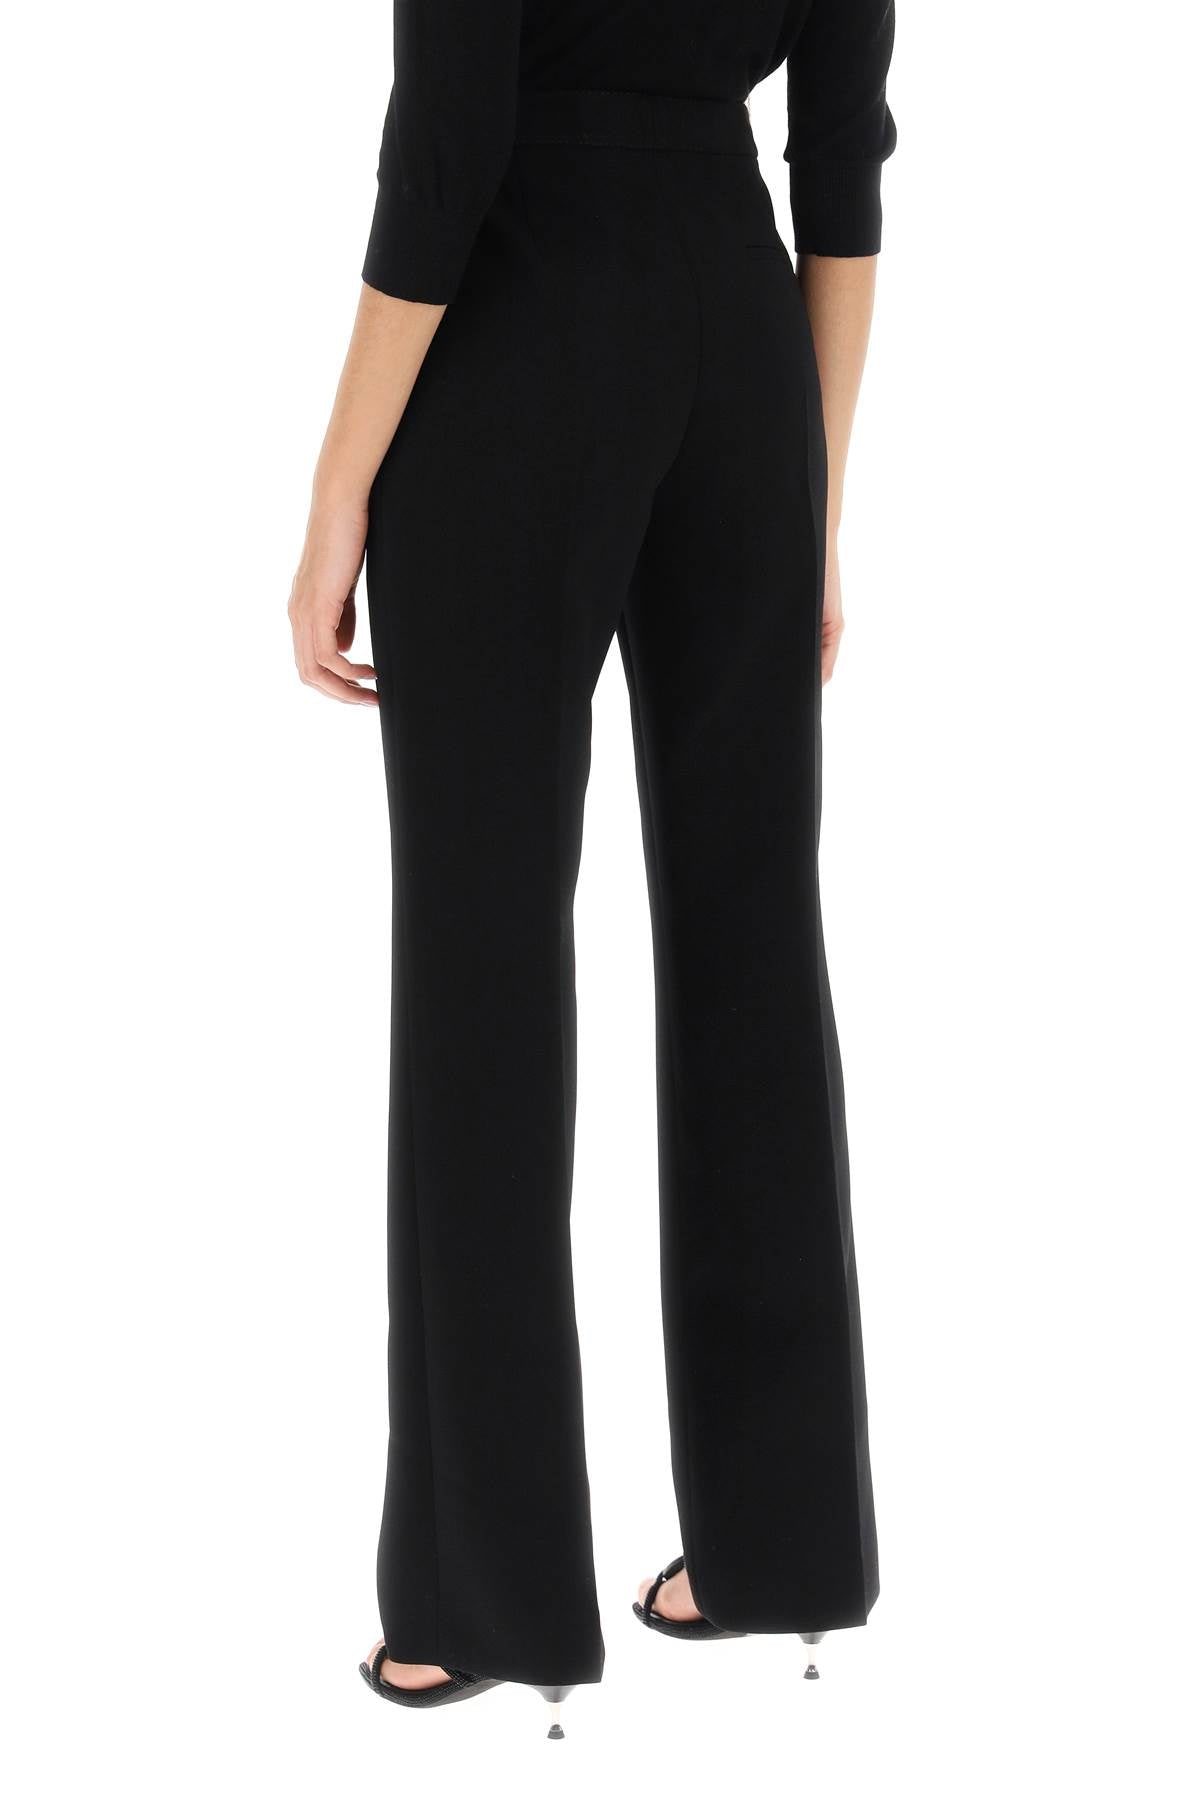 Tory burch straight leg pants in crepe cady-2